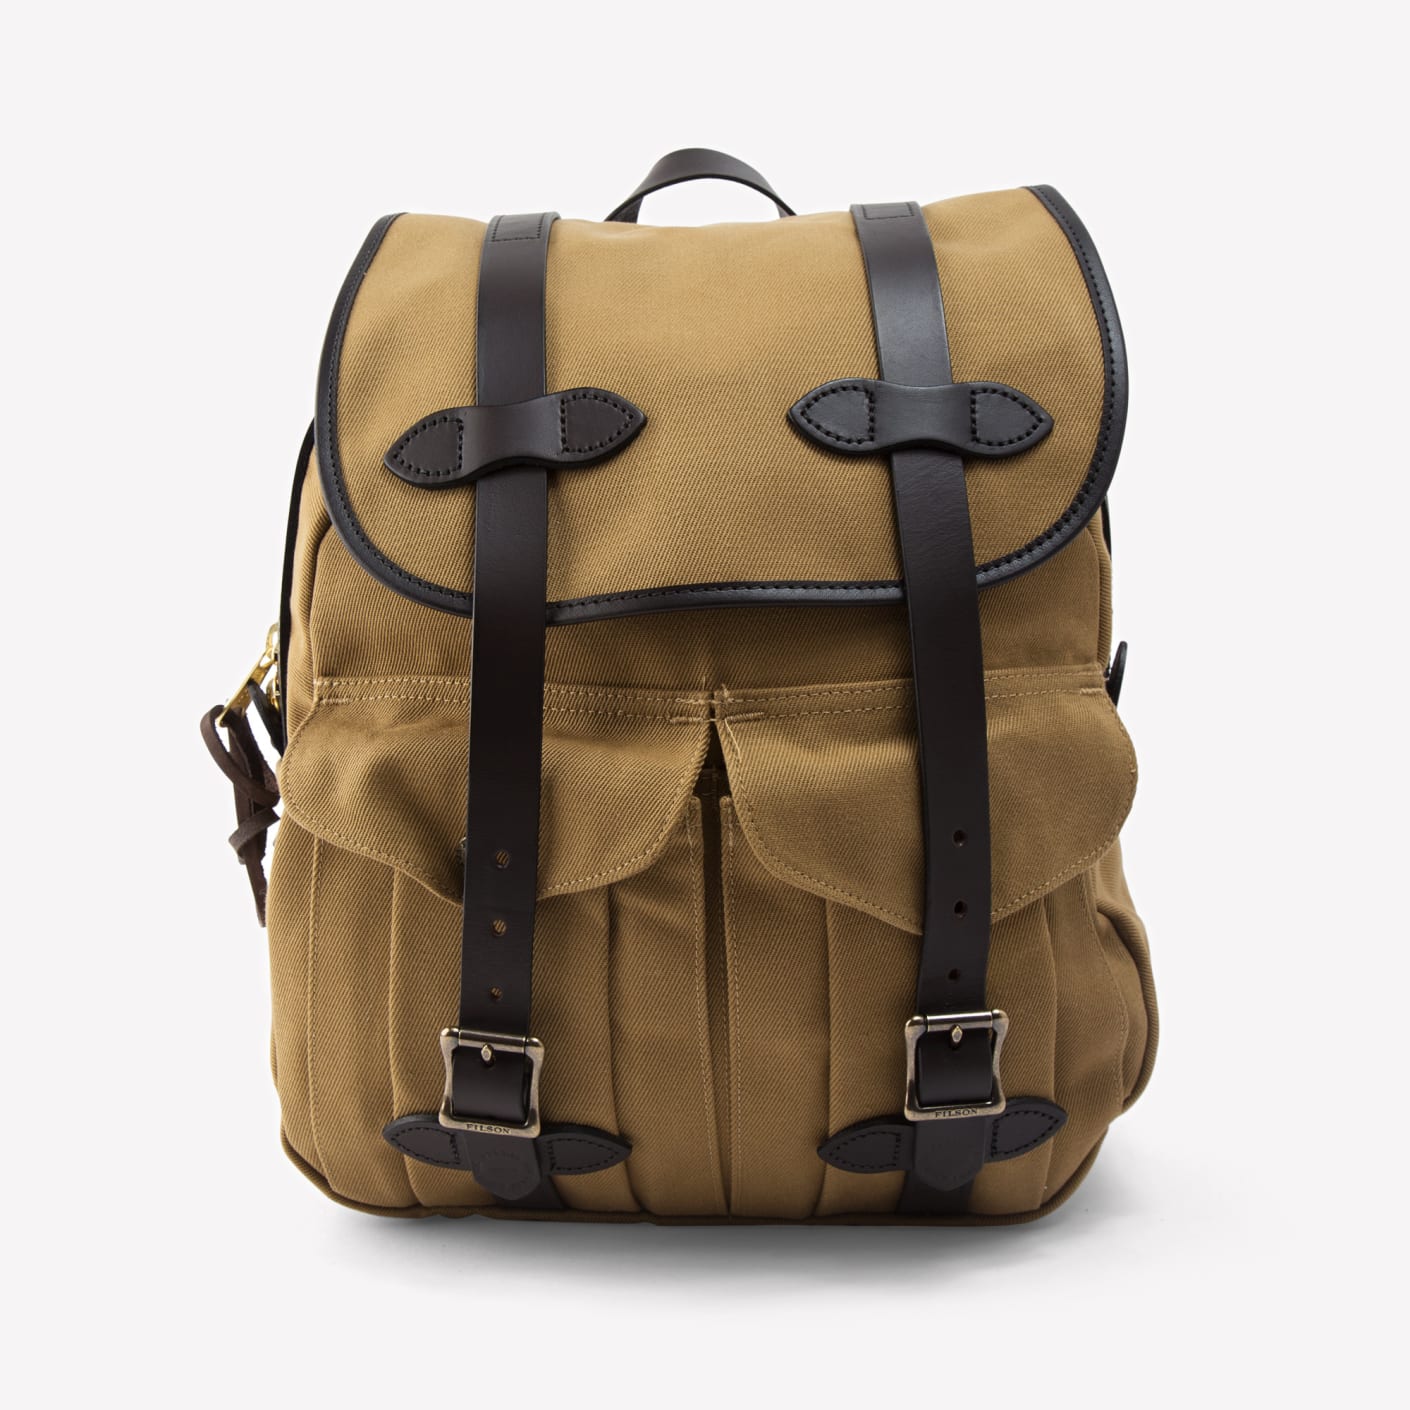 Filson Twill and Bridle Leather Rucksack, Tan | Bespoke Post